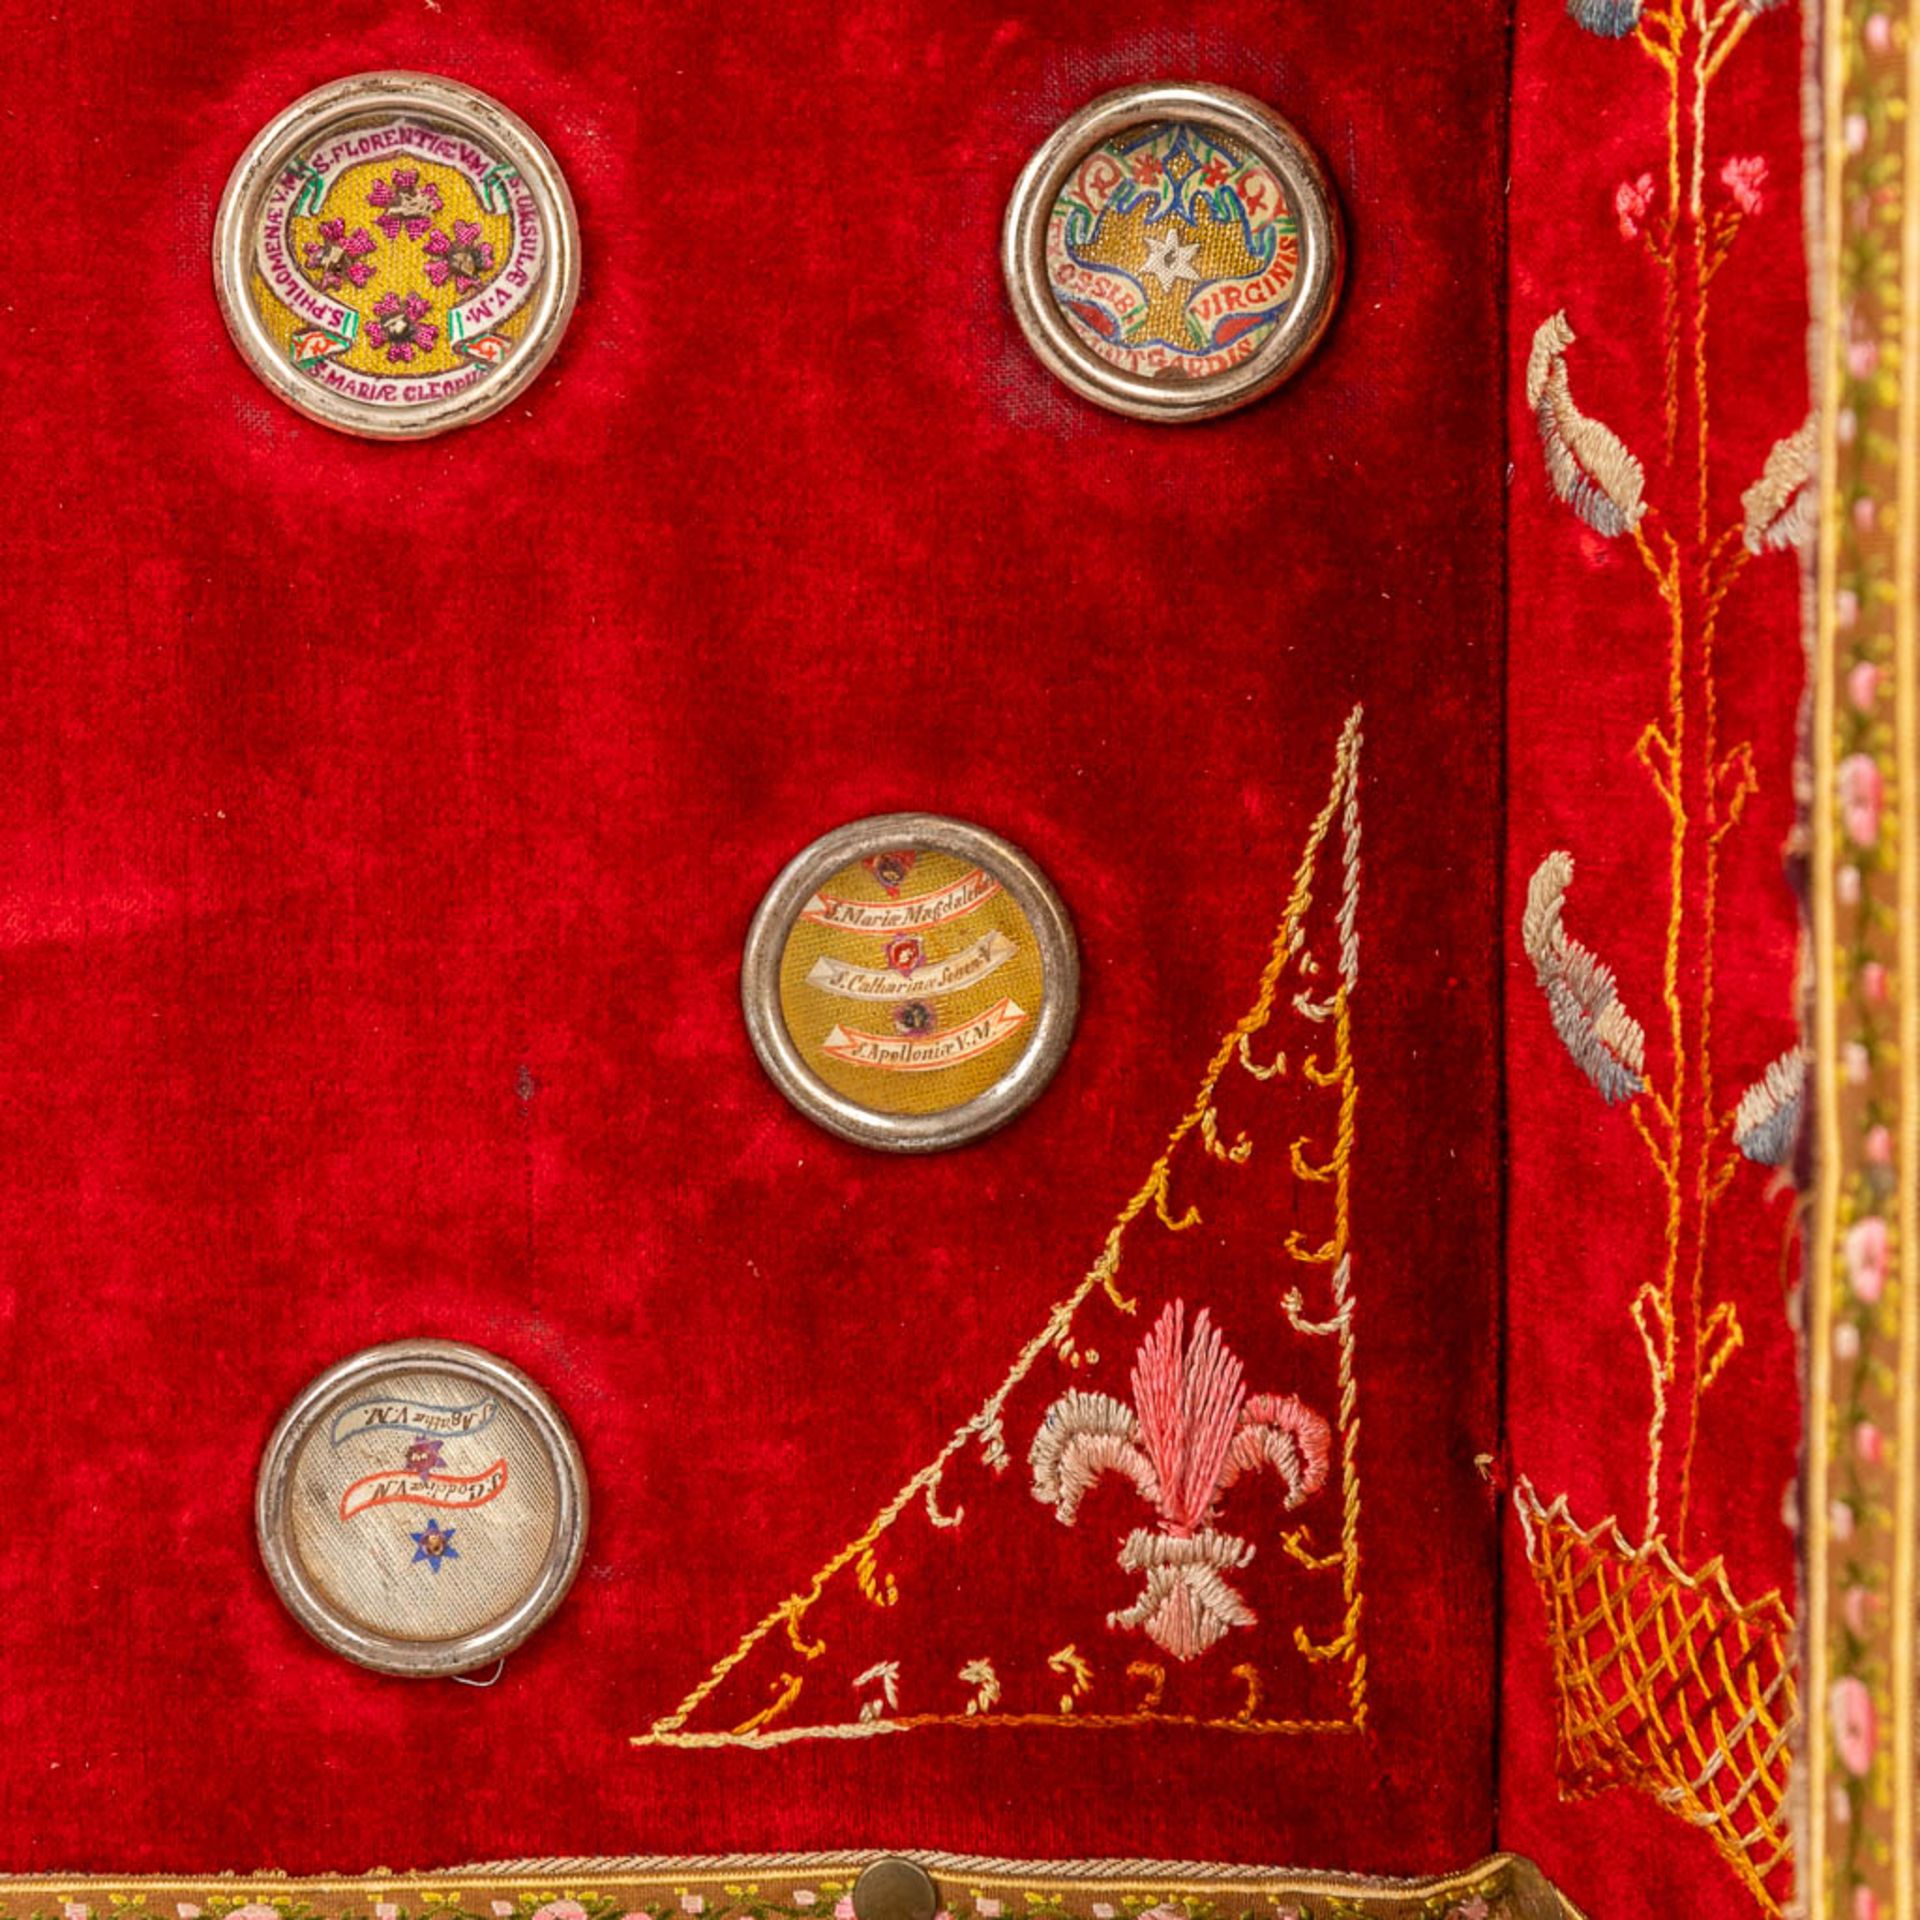 An antique reliquary box with relics a relic crucifix and embroidery. (L:13 x W:52 x H:75 cm) - Image 11 of 23